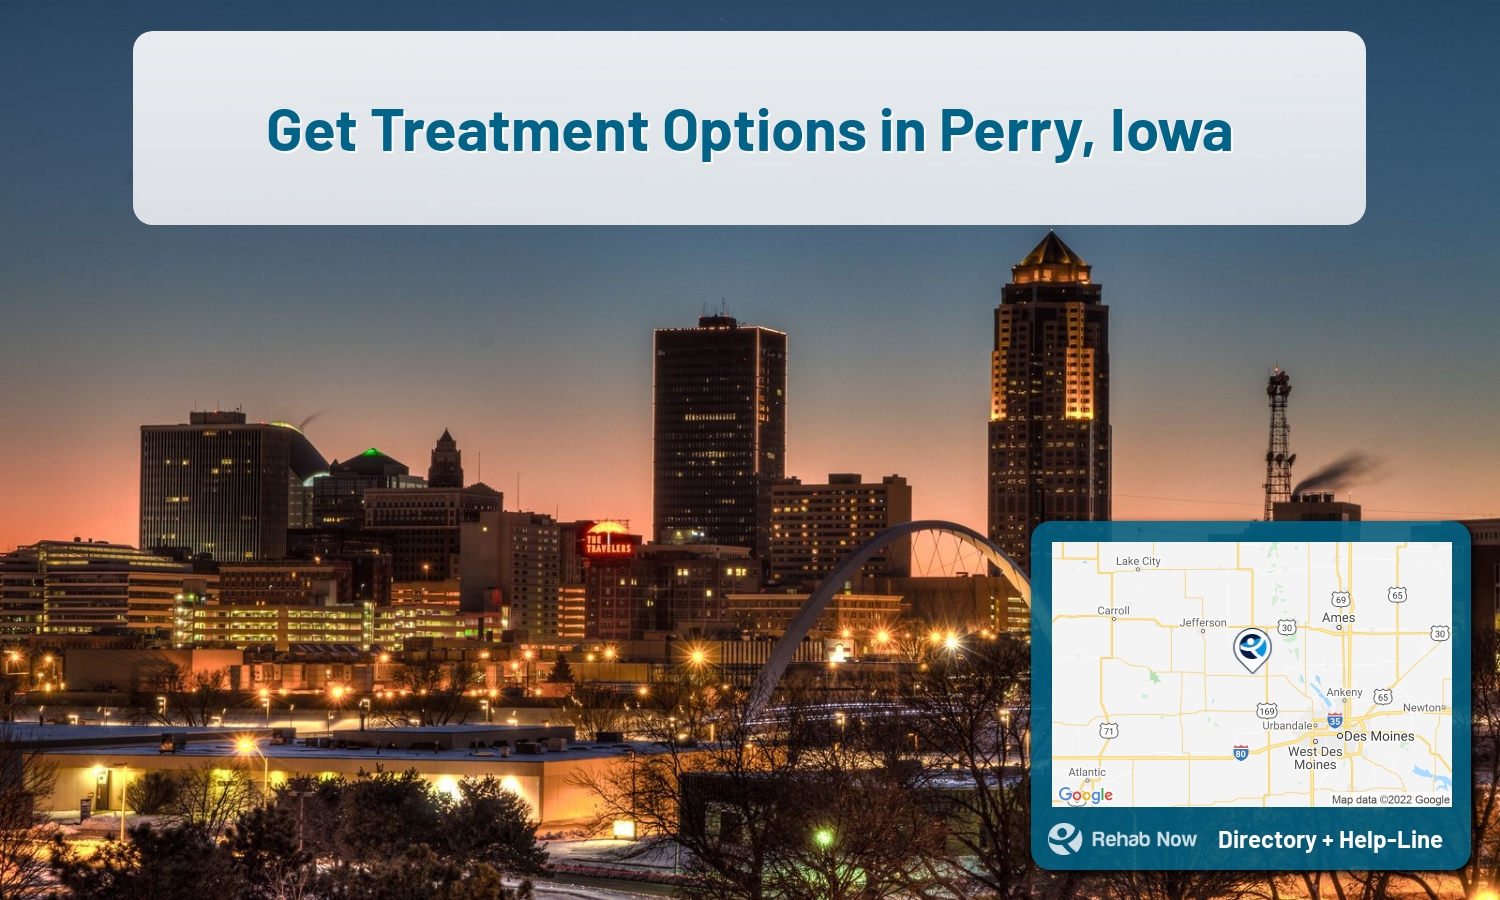 Our experts can help you find treatment now in Perry, Iowa. We list drug rehab and alcohol centers in Iowa.